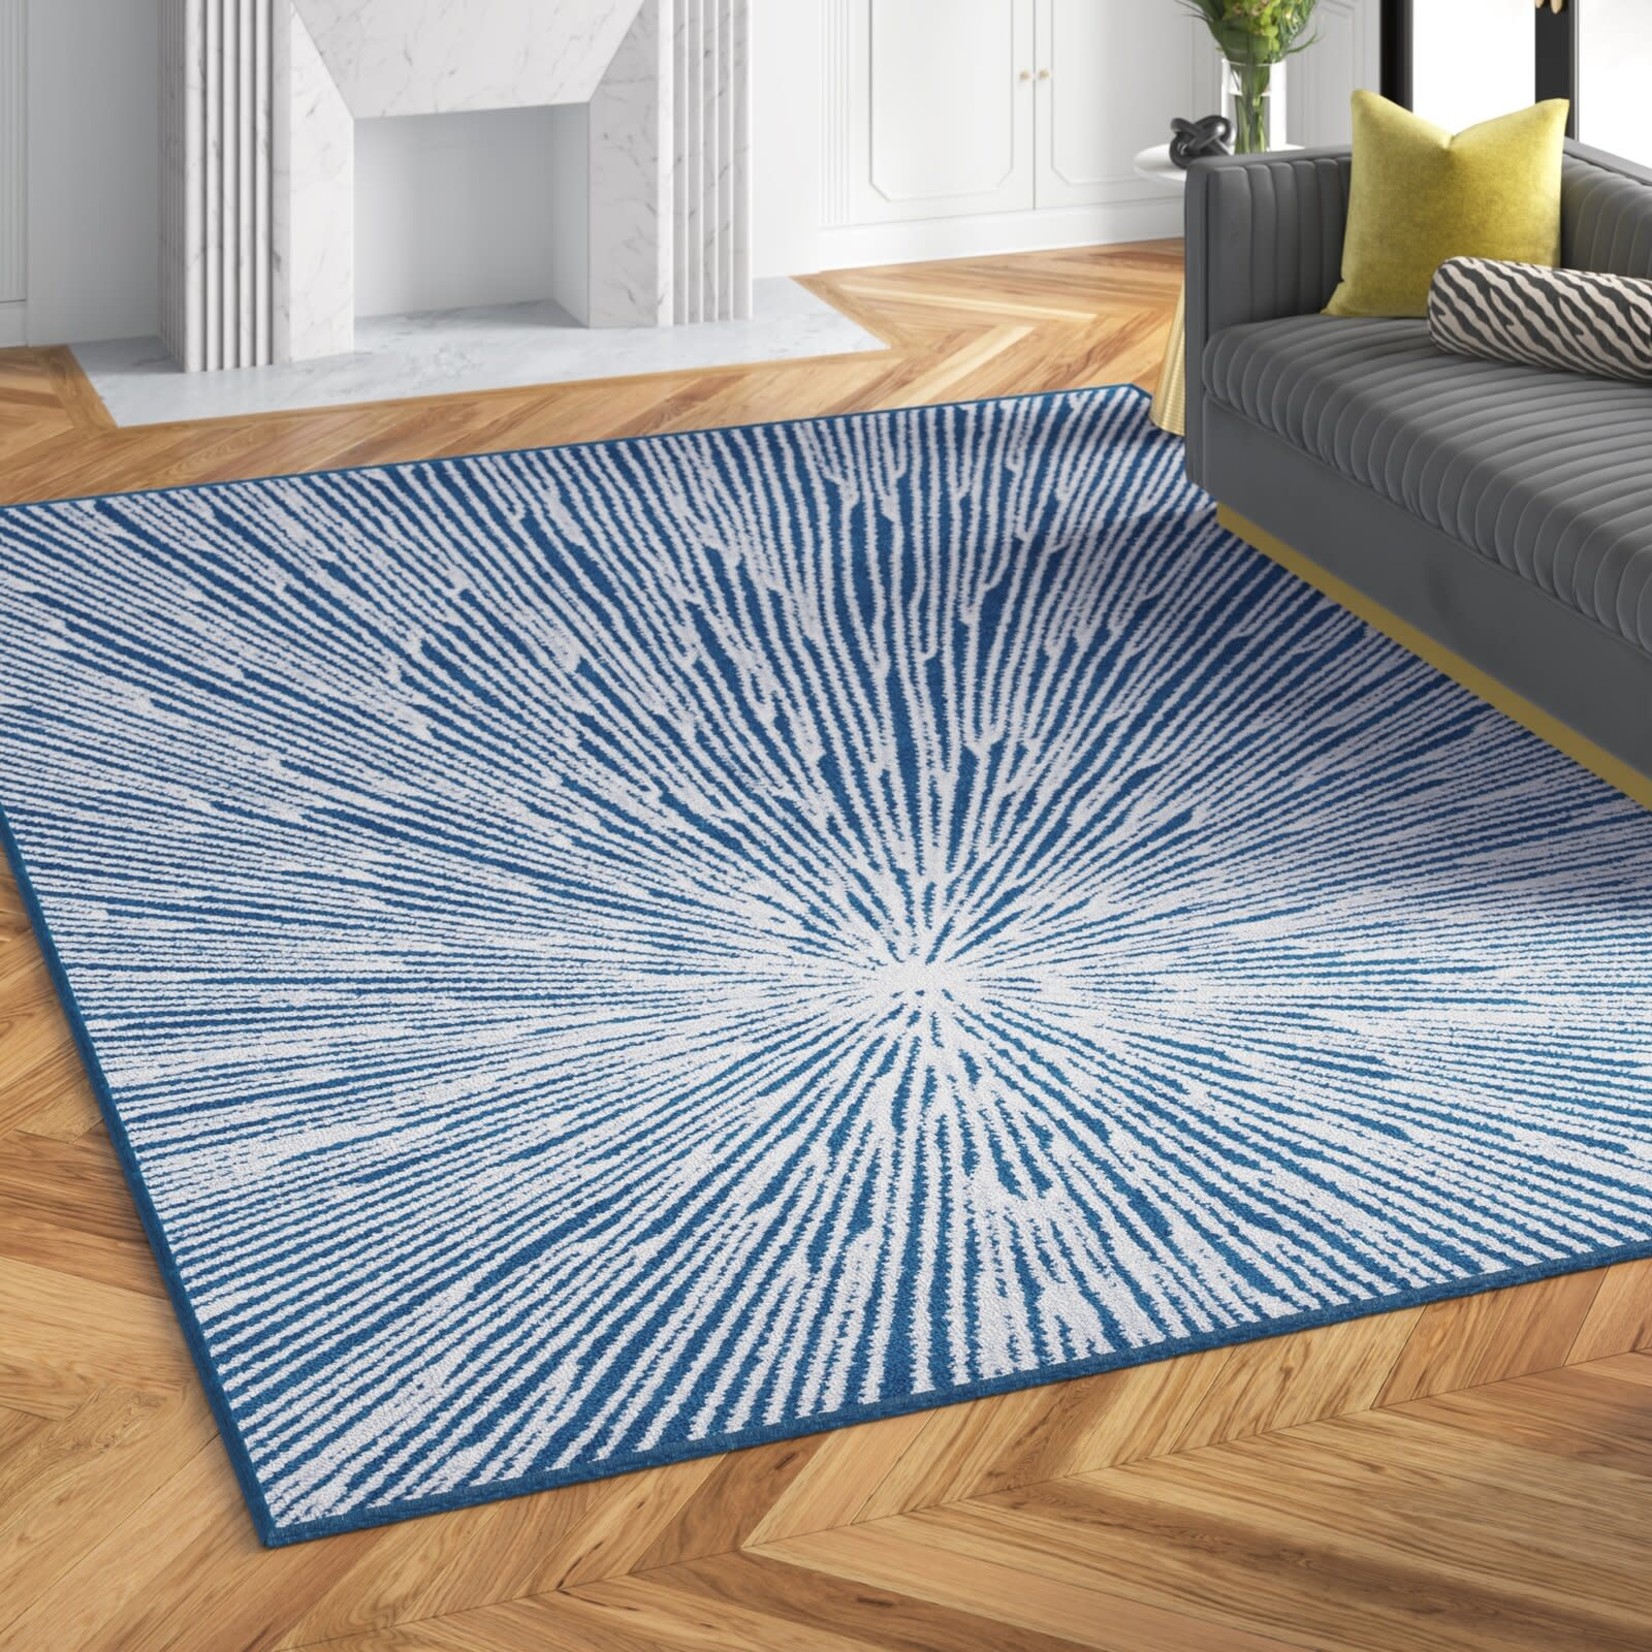 *9' x 12' Amy Abstract Navy Blue/Gray Area Rug